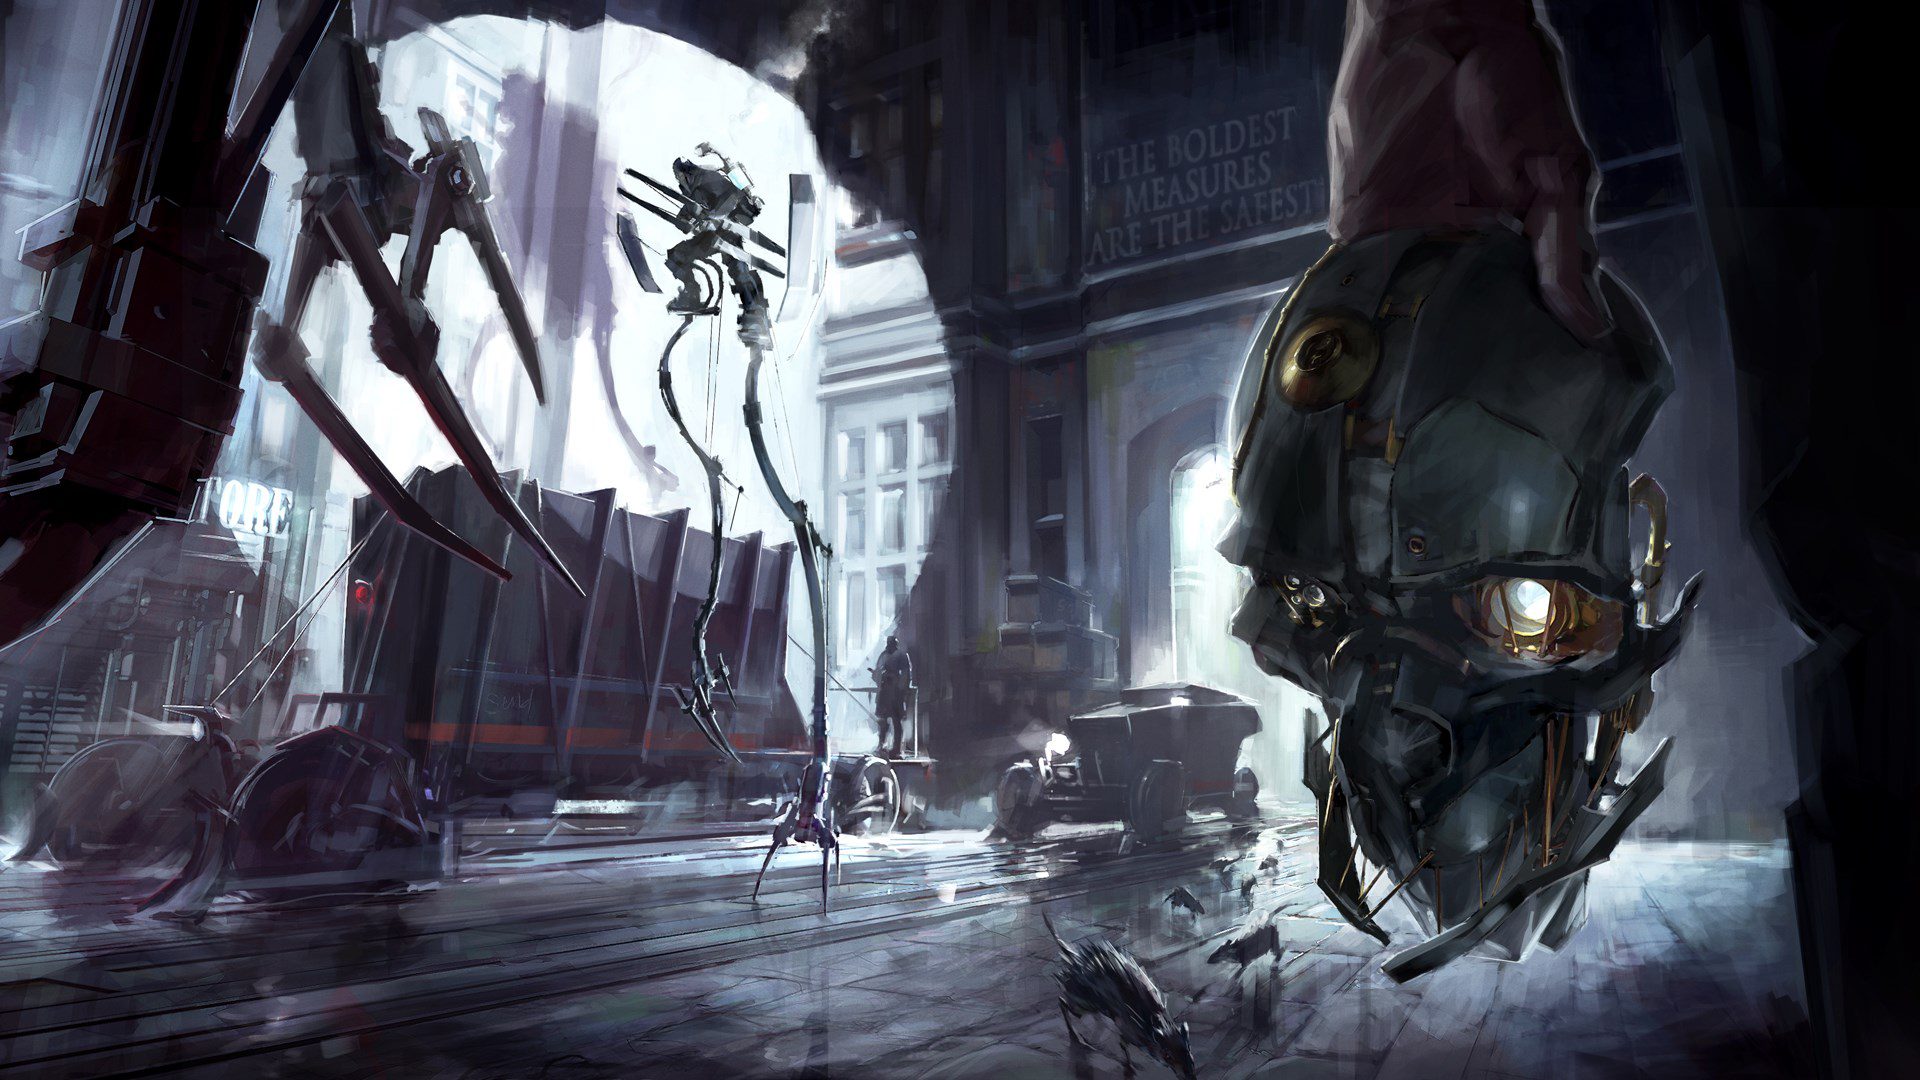 Want to win a Dishonored-inspired Xbox Series X for its 10th anniversary?  Participate in this giveaway